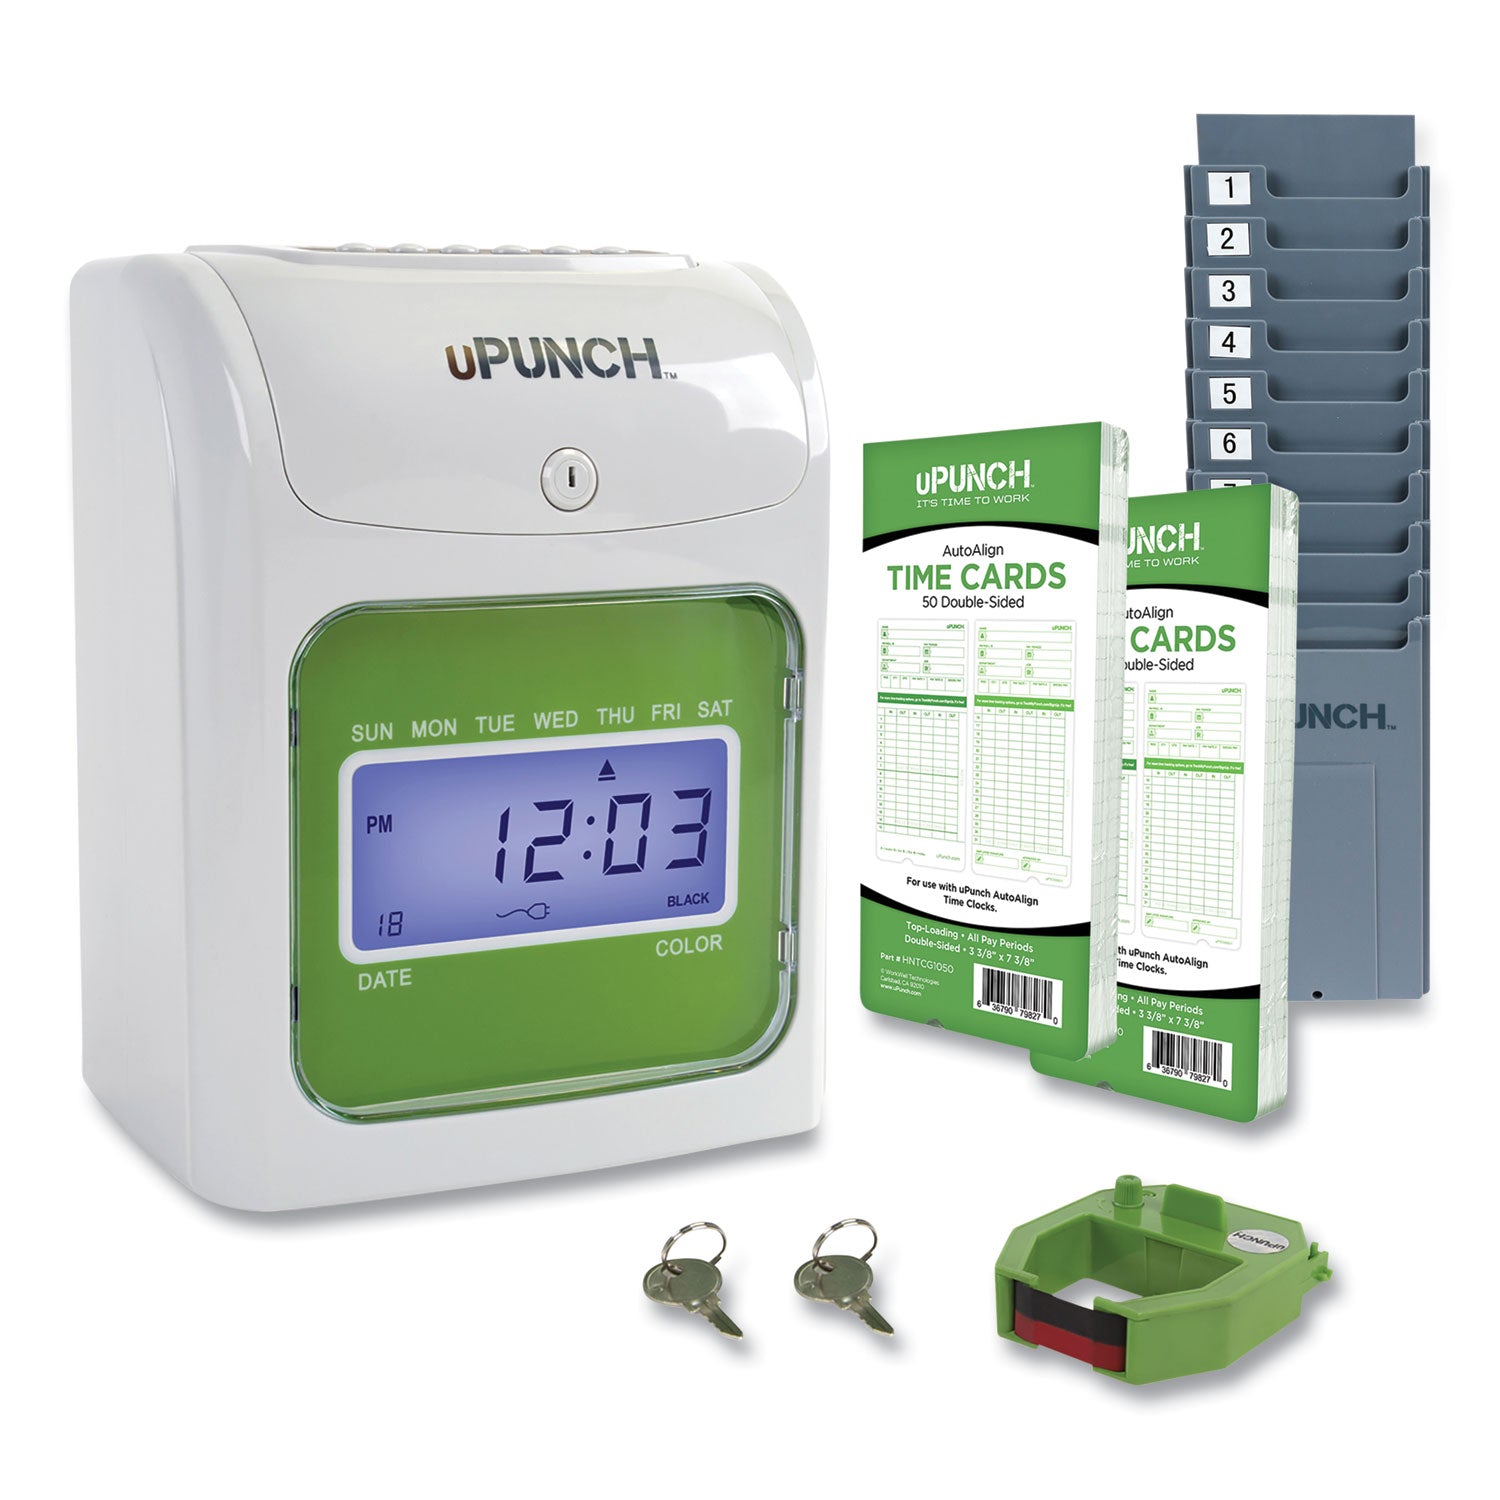 hn1500-electronic-non-calculating-time-clock-bundle-lcd-display-beige-green_ppzhn1500 - 1